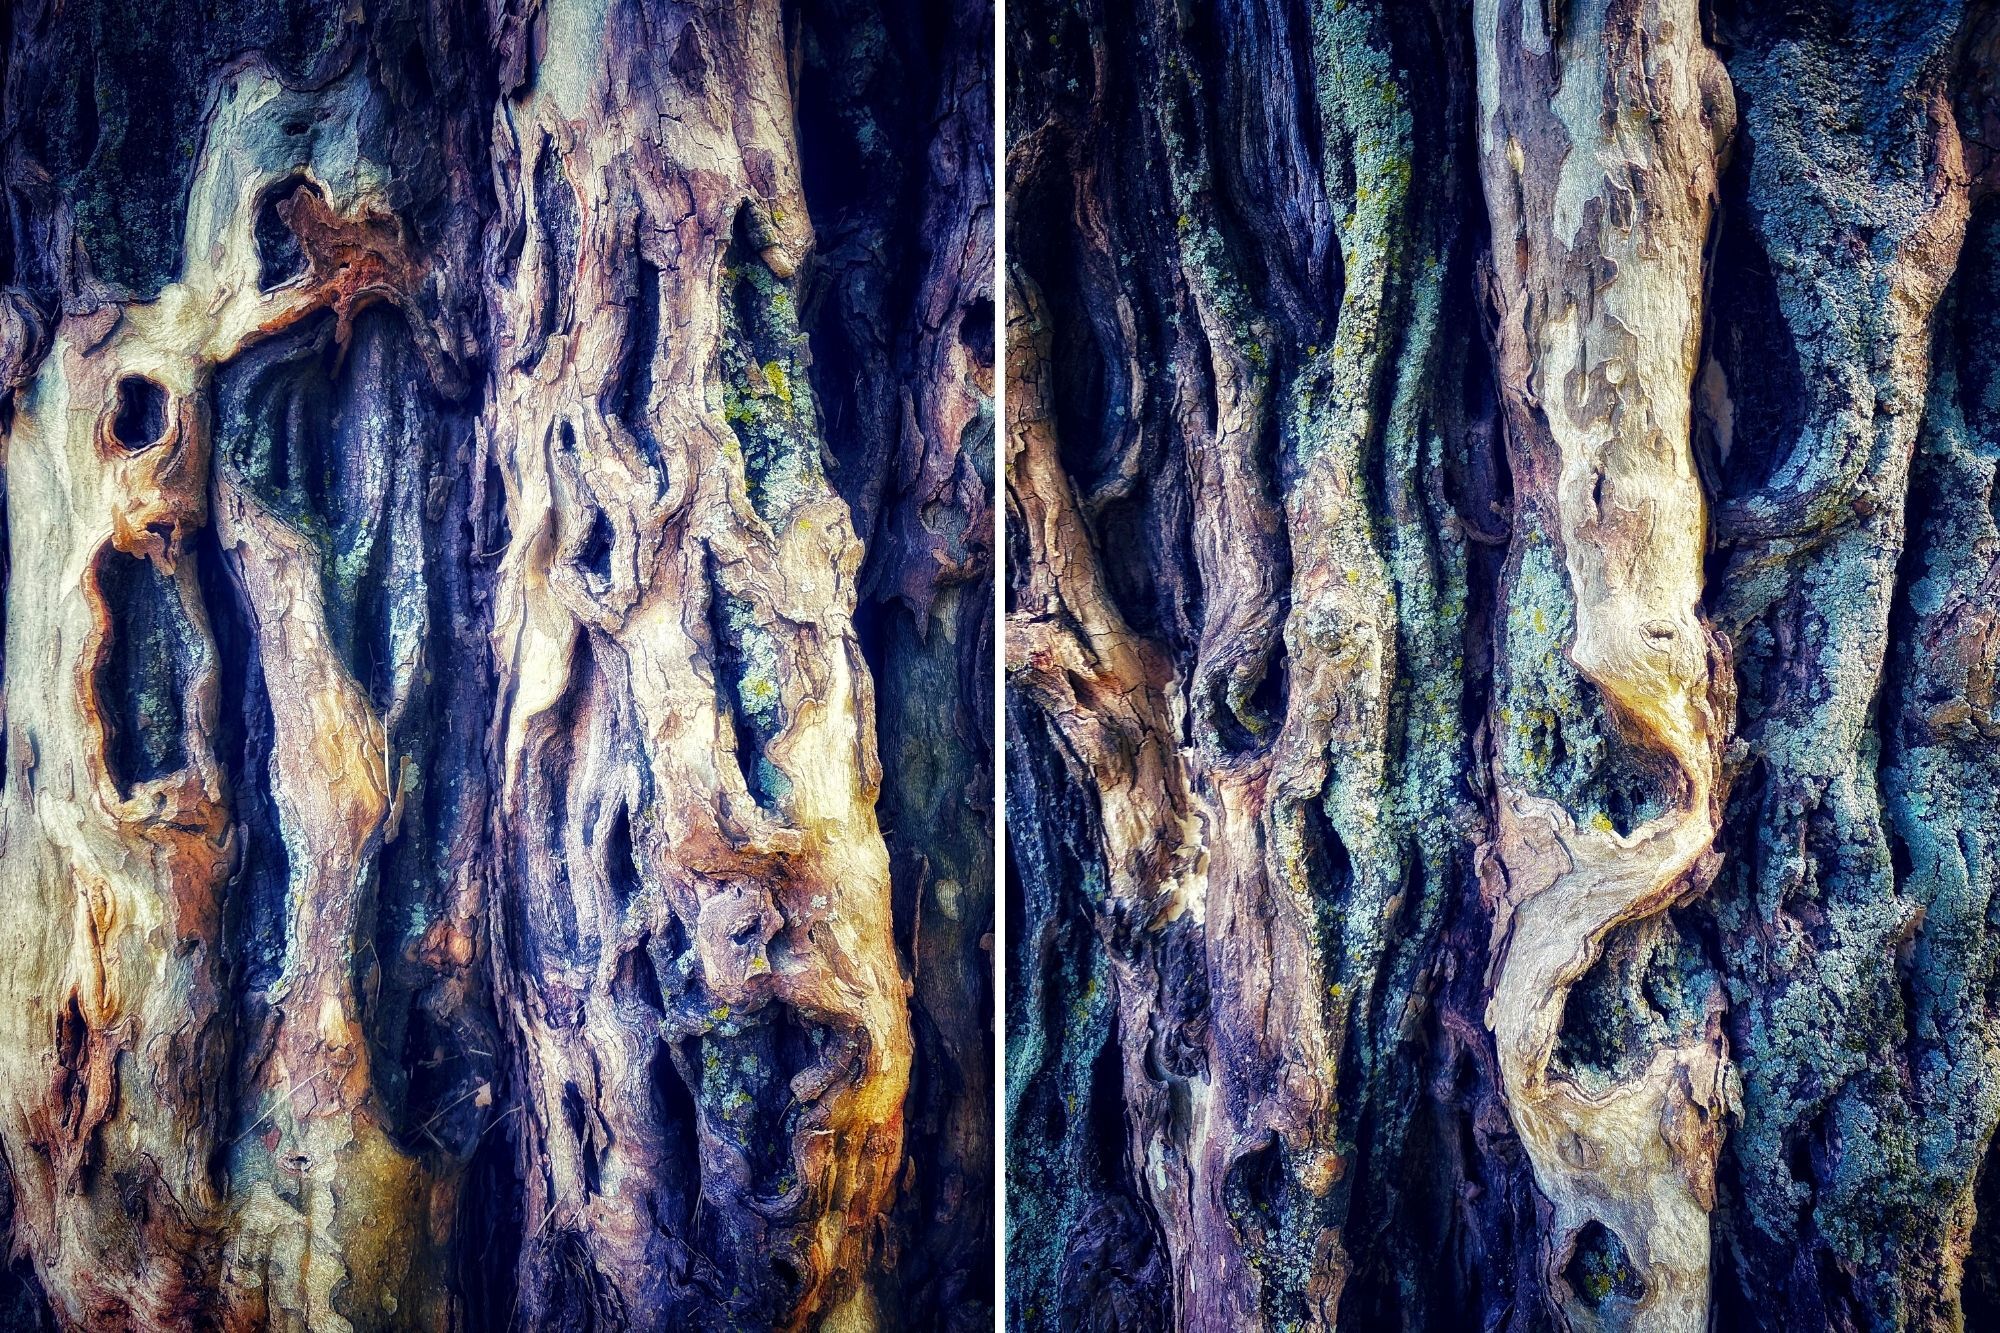 Two close-up images of tree bark peeling.